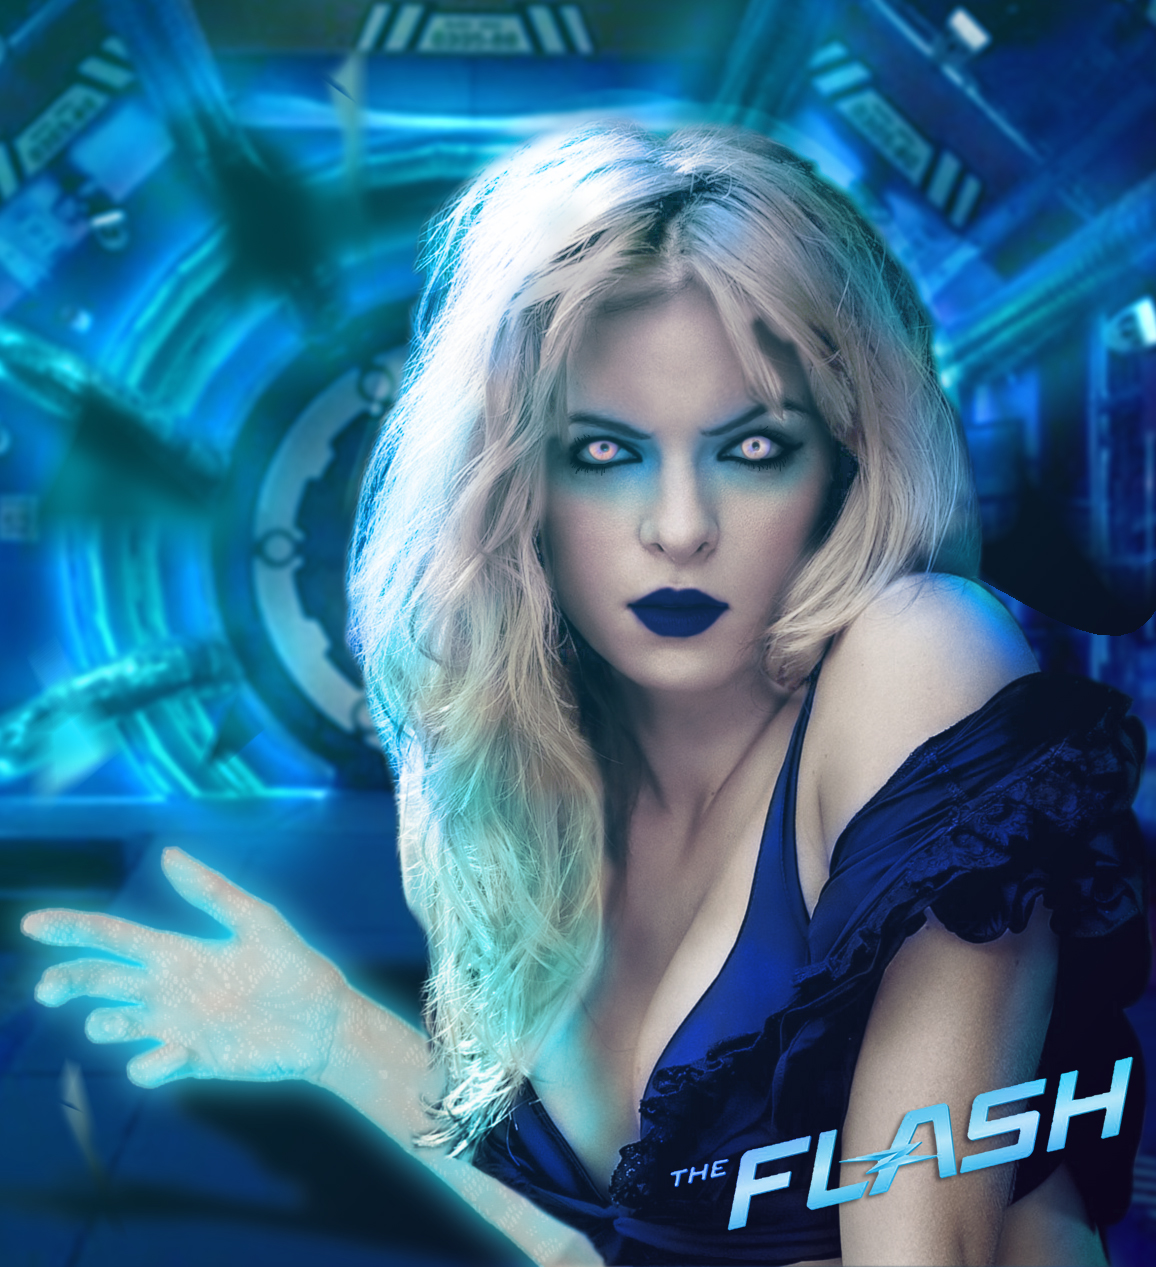 Killer Frost Wallpapers Comics Hq Killer Frost Pictures 4k Wallpapers 2019 Best high quality 4k ultra hd wallpapers collection for your phone. killer frost wallpapers comics hq